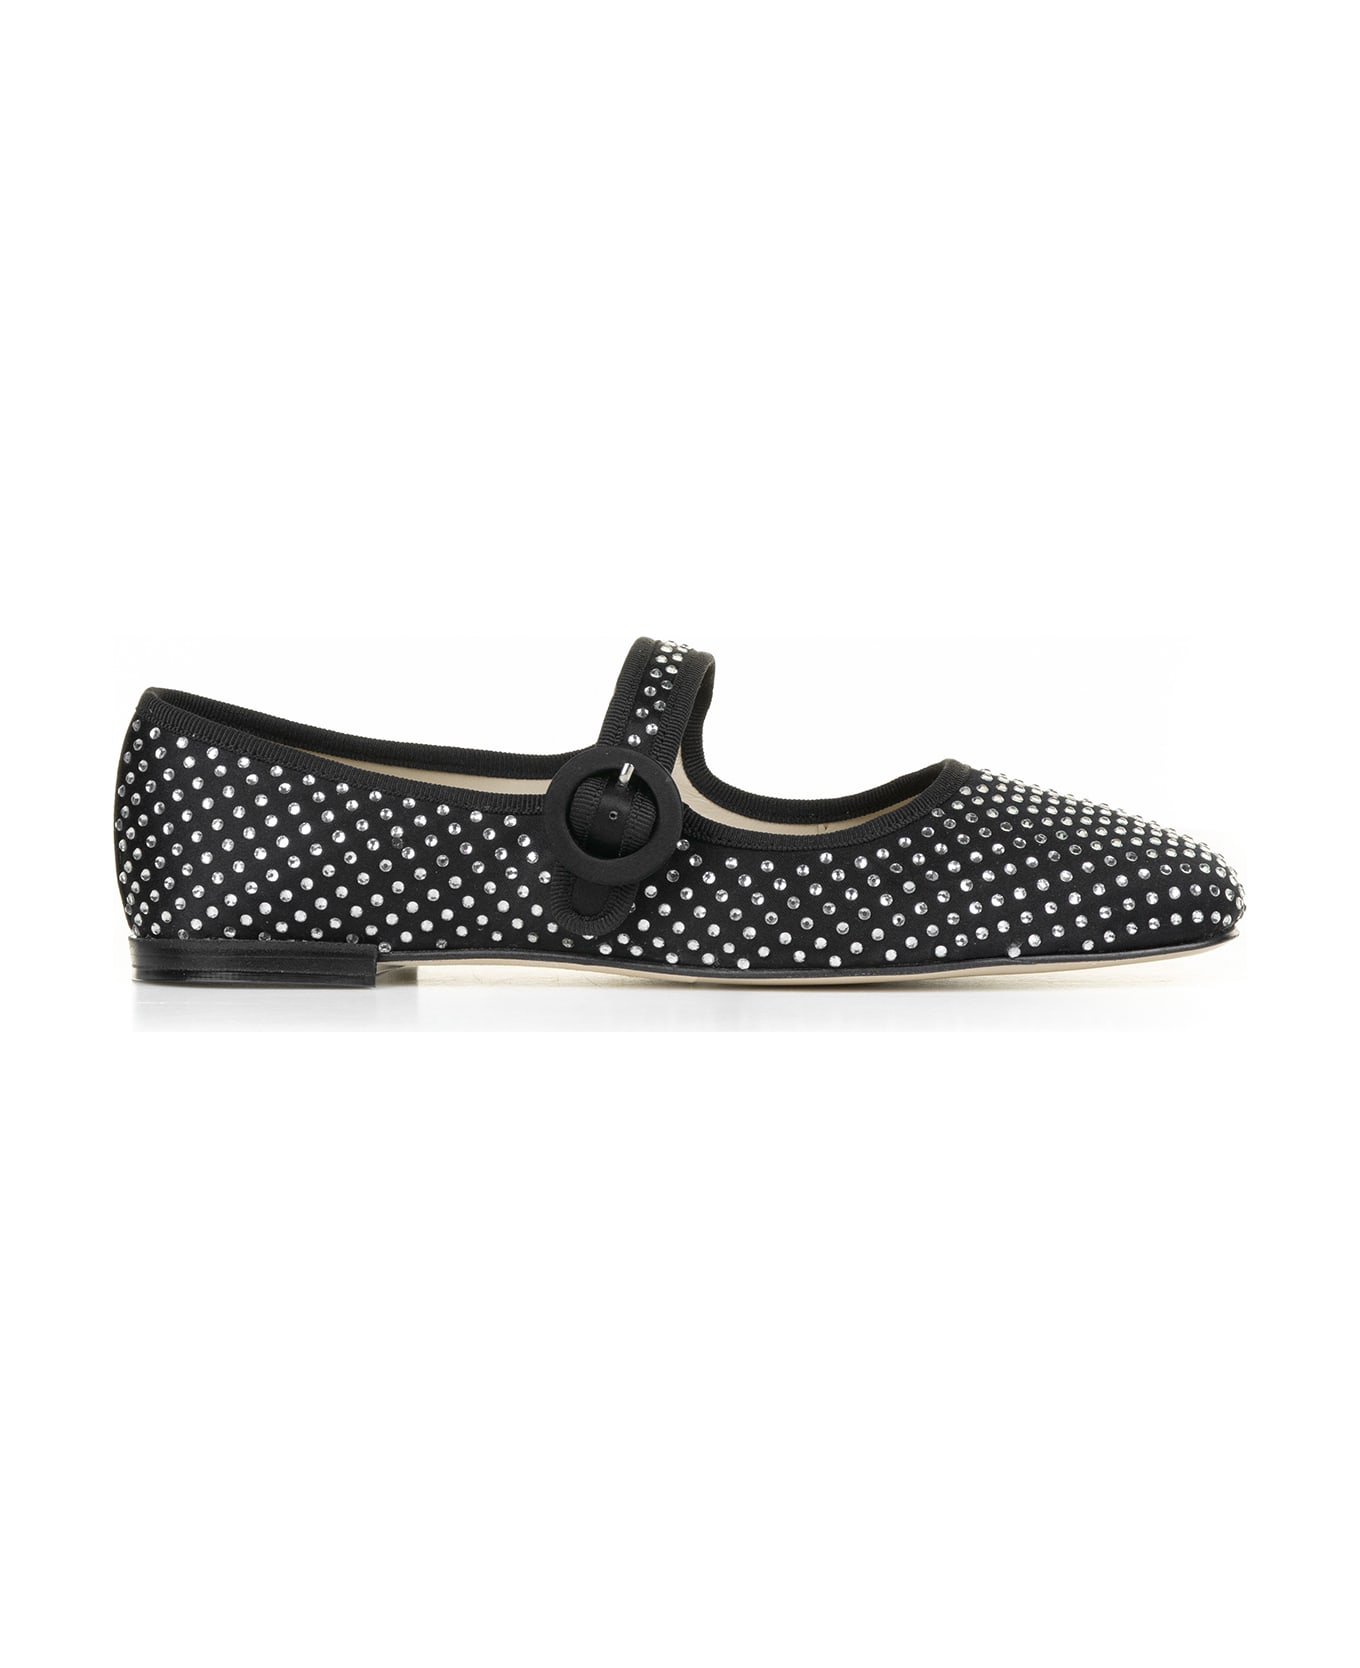 Repetto Square Toe Mary Jane Ballet Flat With Rhinestones - NOIR